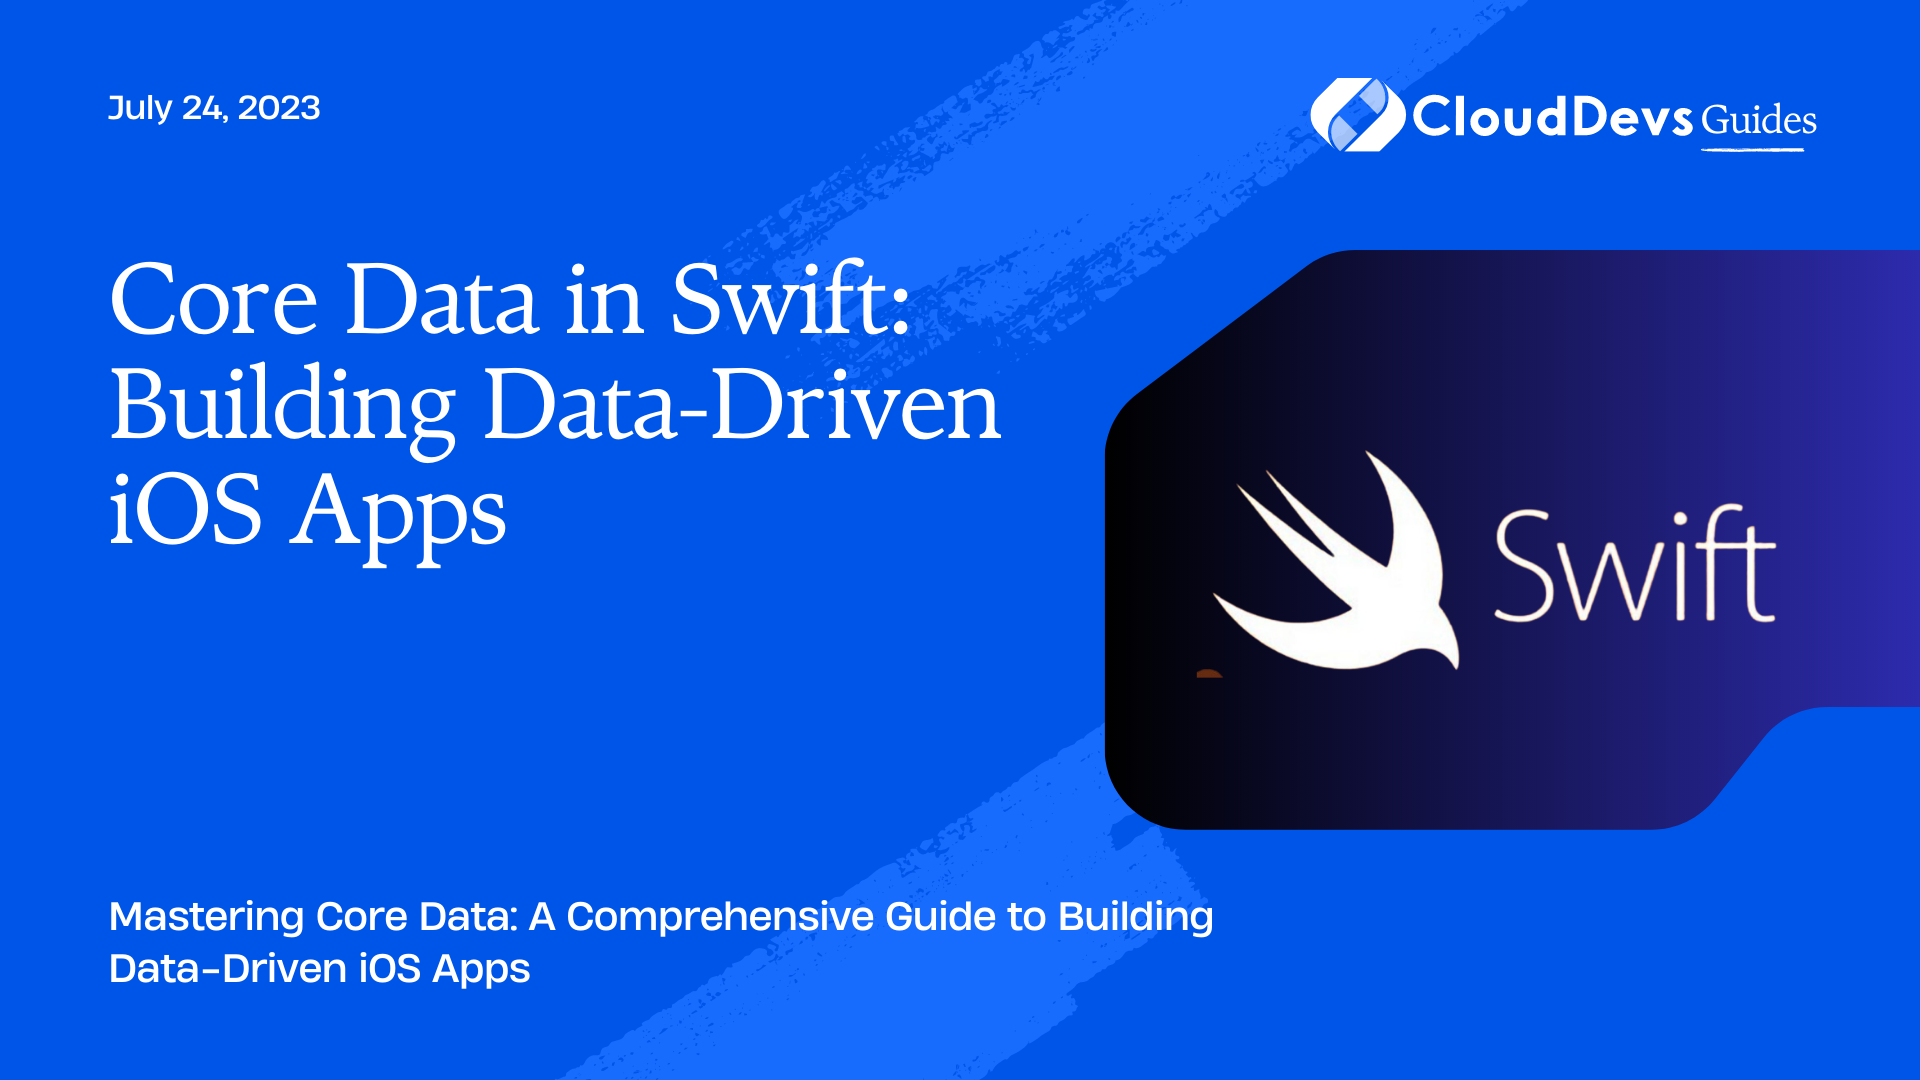 Core Data in Swift: Building Data-Driven iOS Apps